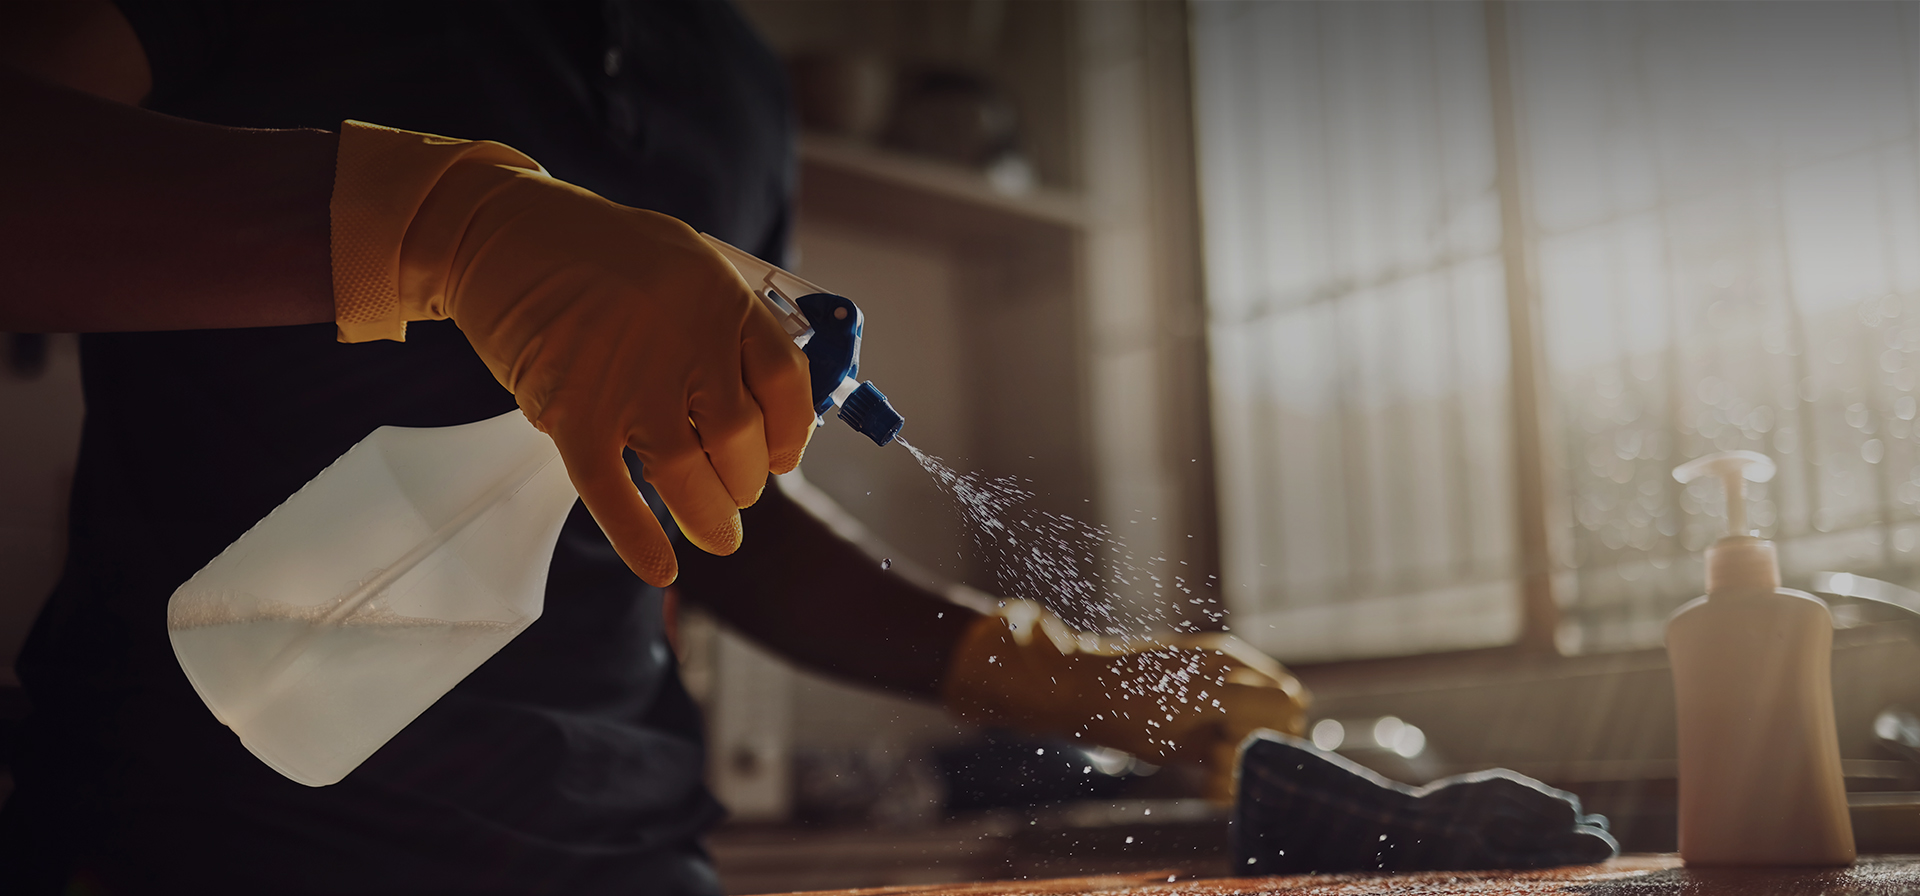 close up of a person spraying a cleaning solution onto a countertop with the sun shining in from outside